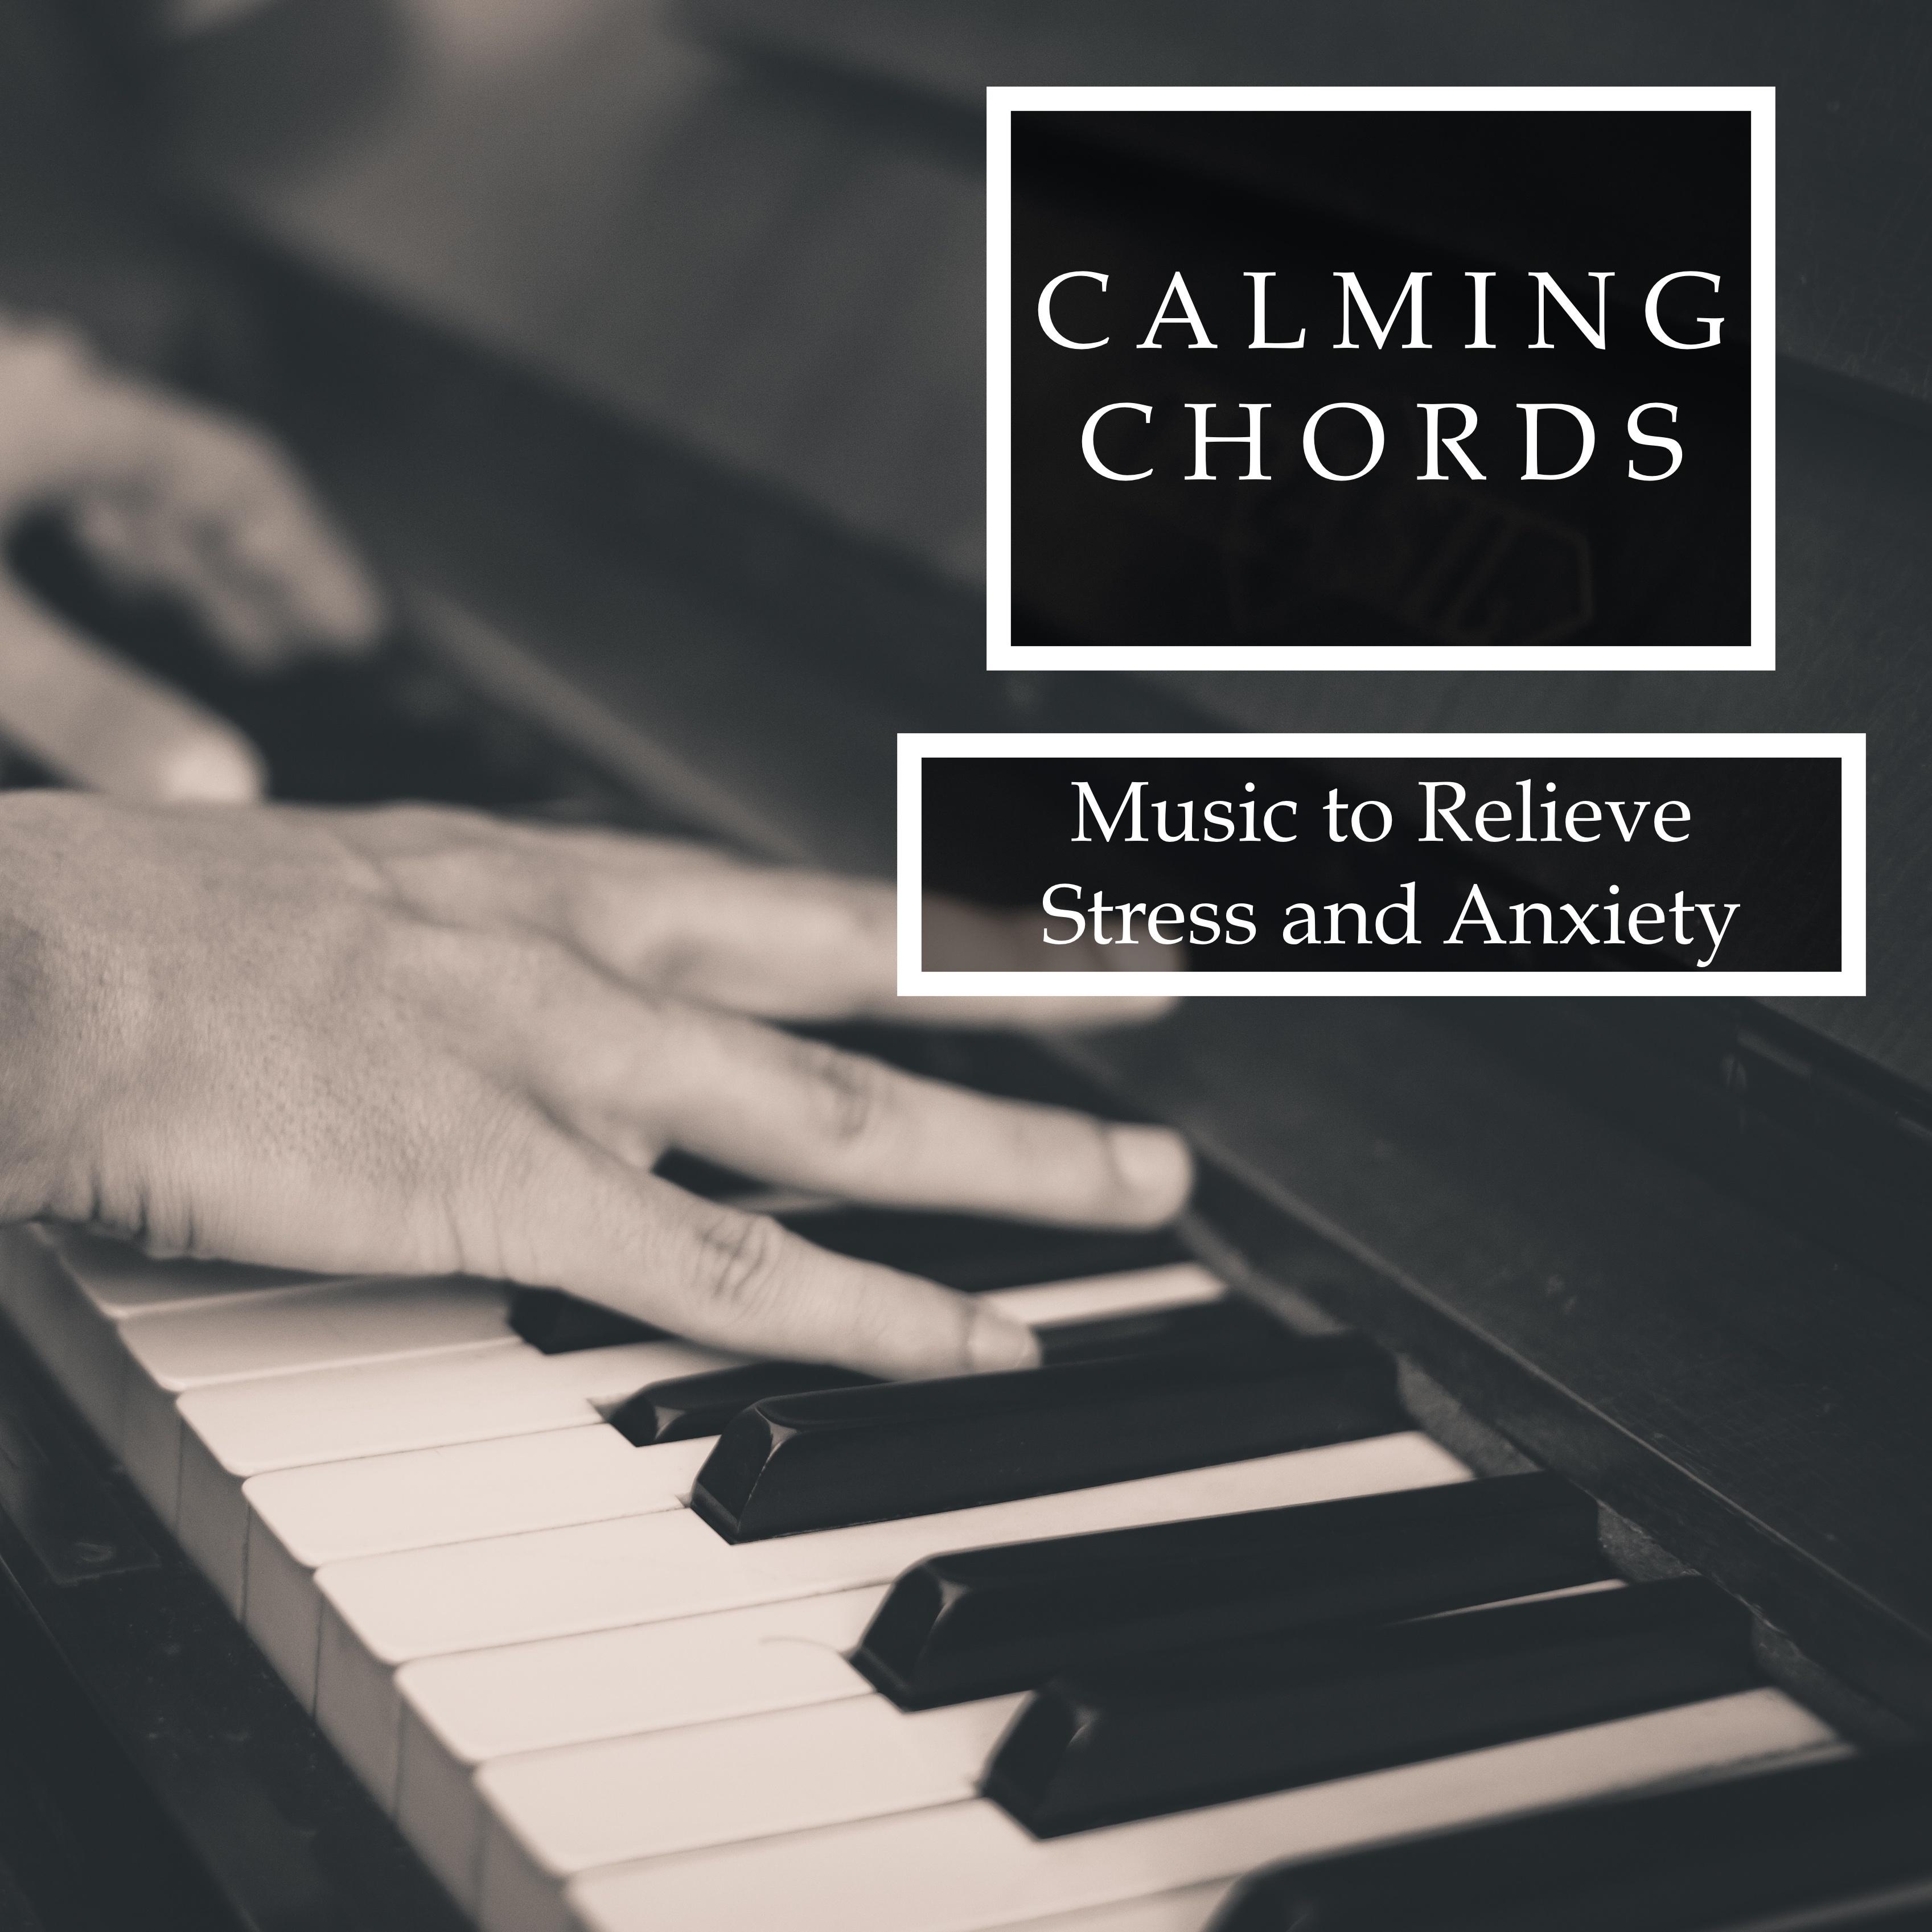 Calming Chords - Piano Tranquility and Pure Relaxation to Relieve Stress and Anxiety